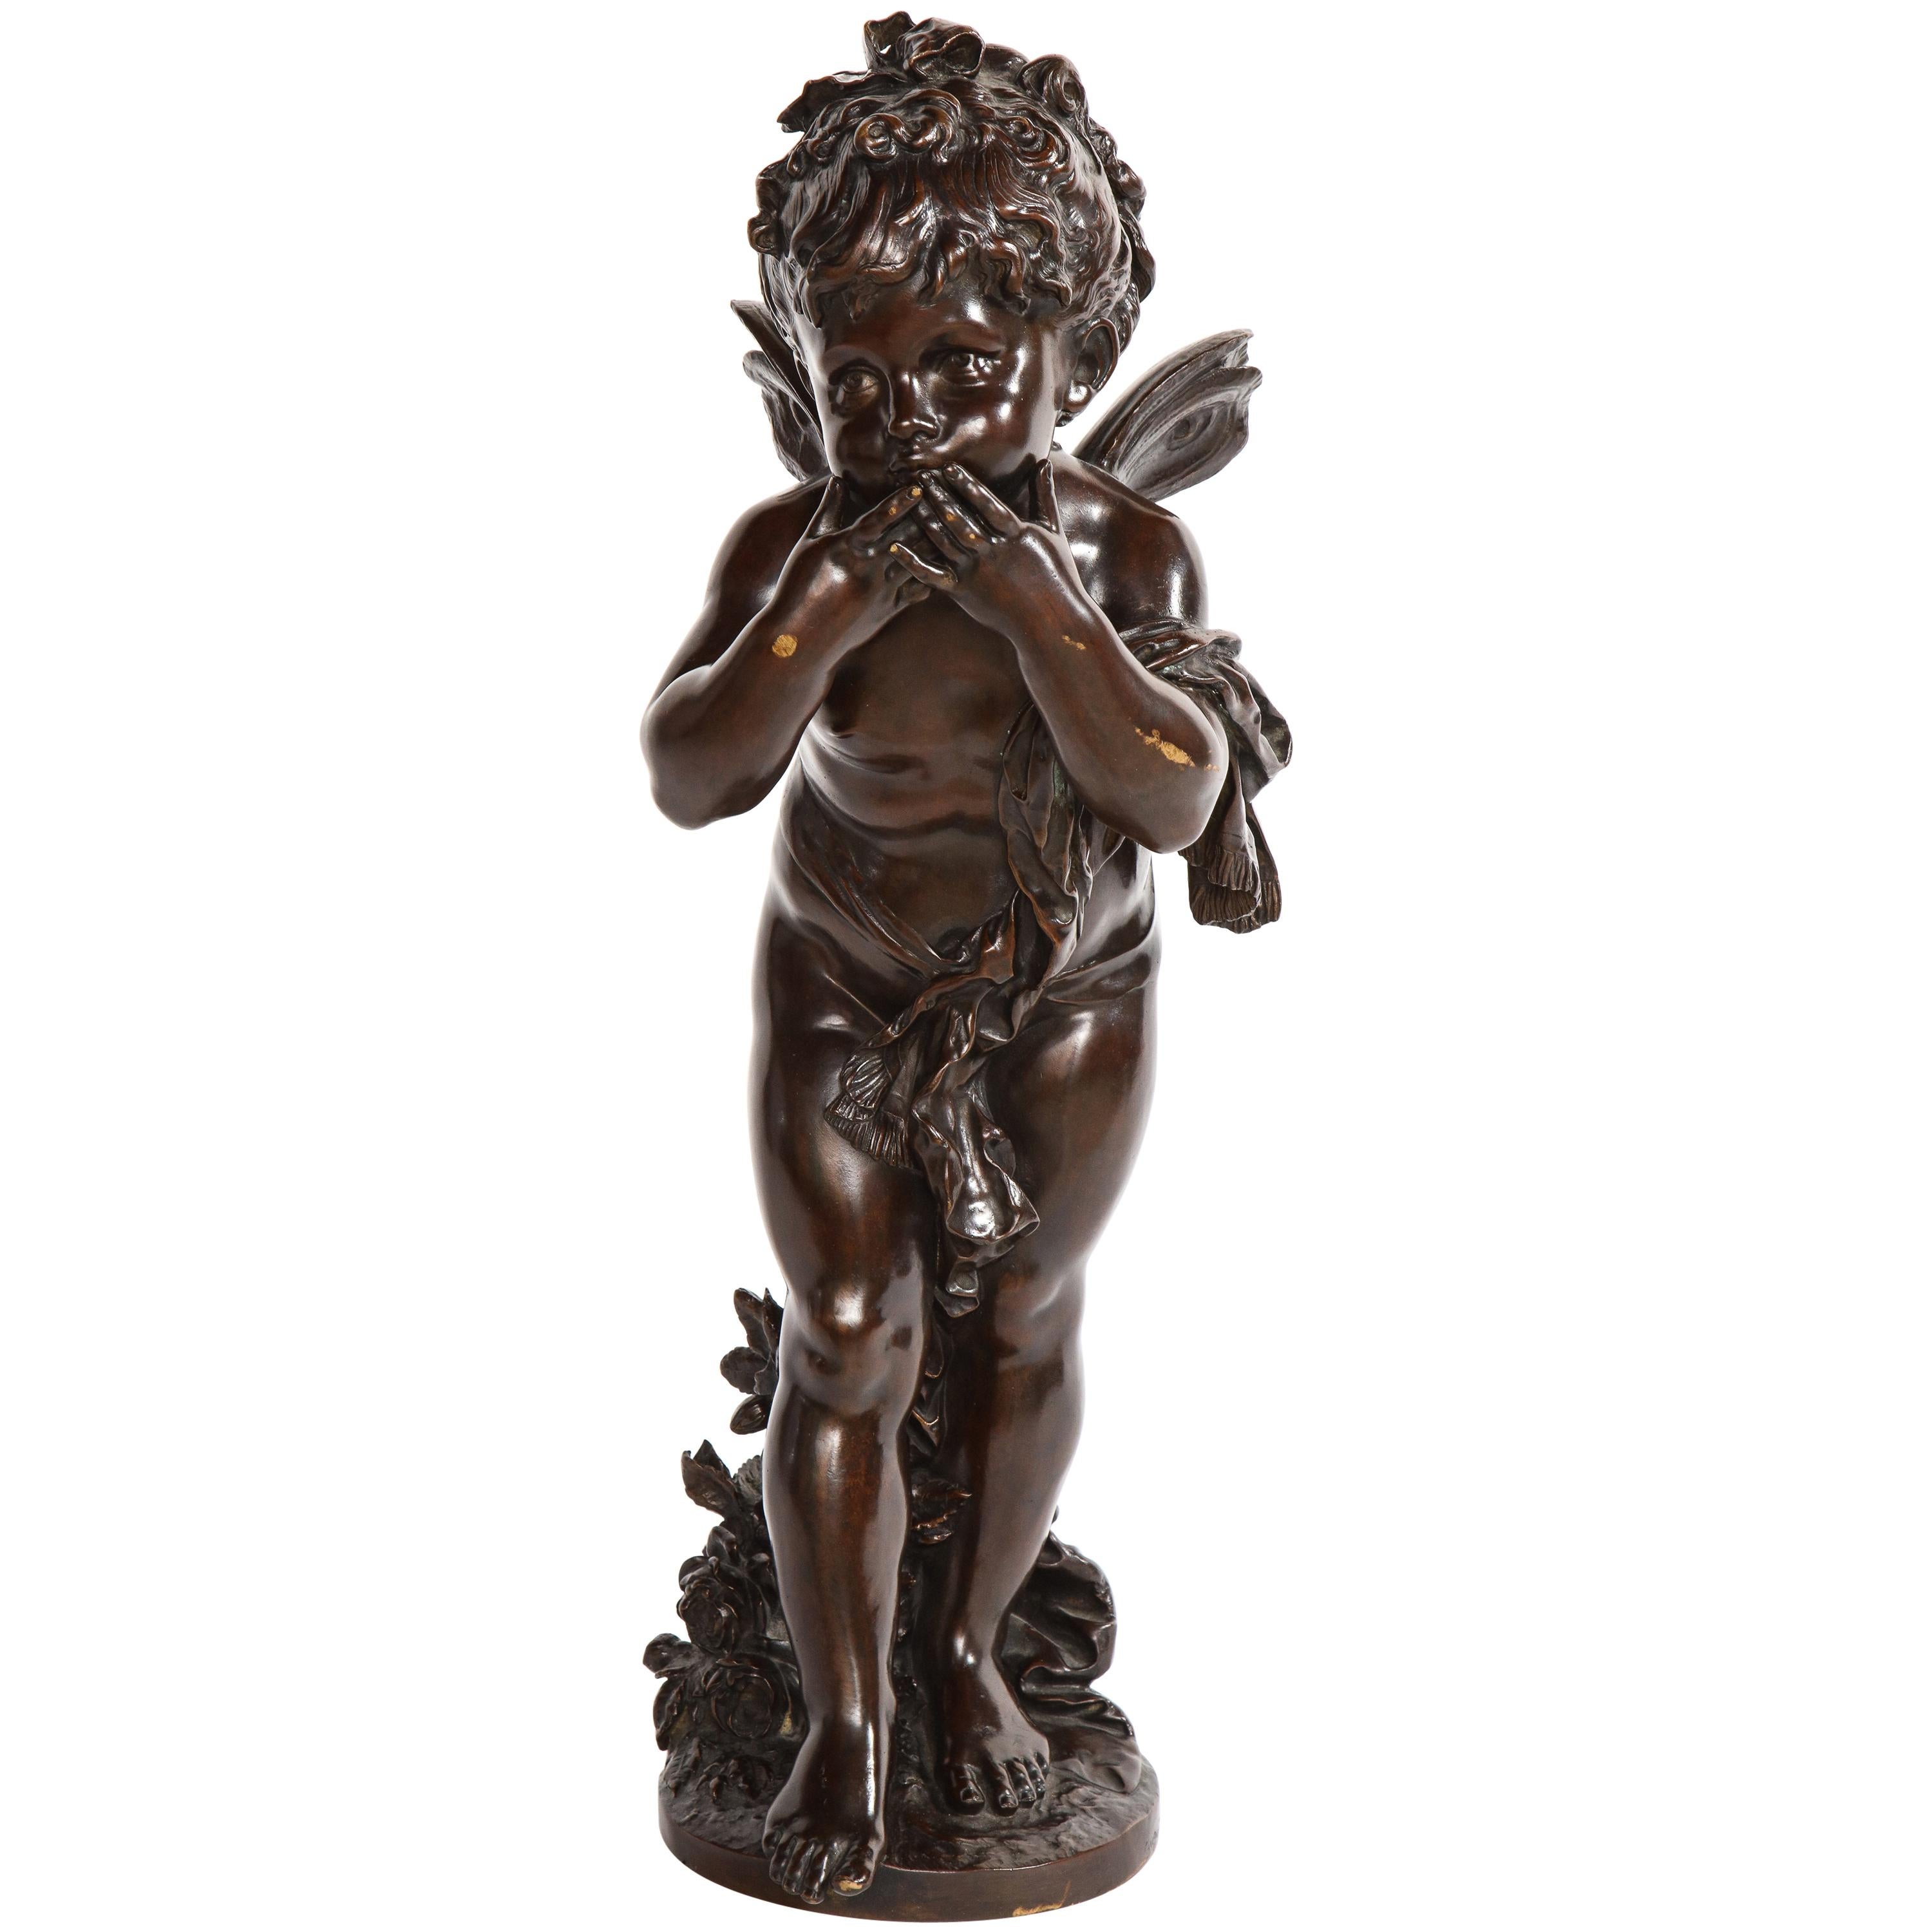 French Patinated Bronze Cherub Sculpture, Signed by Auguste Moreau